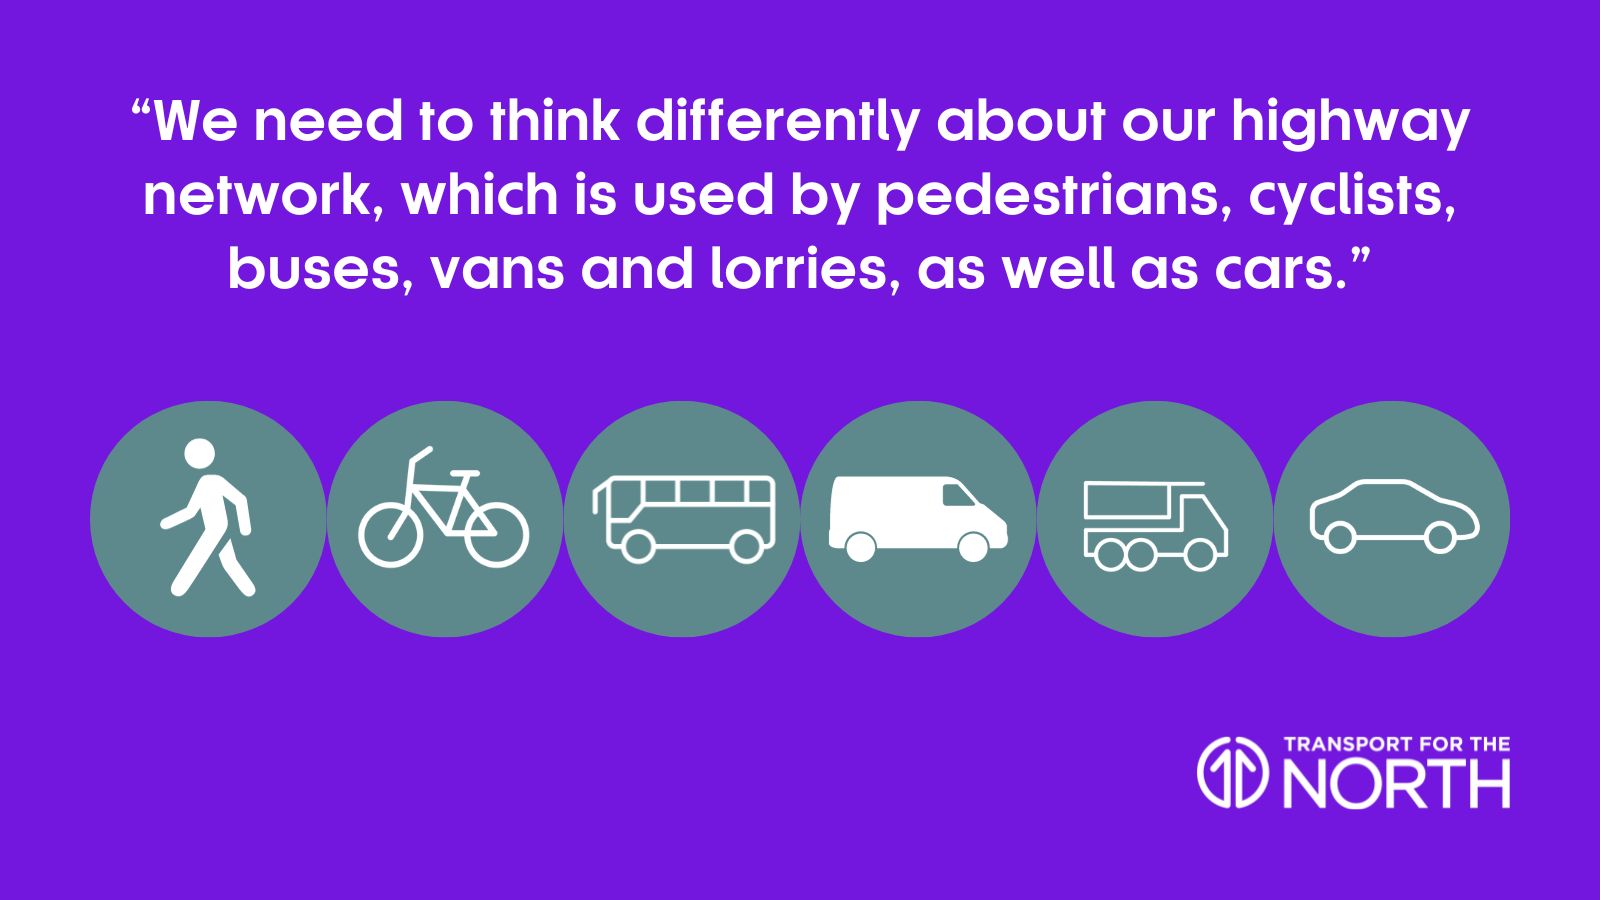 Icons for road transport and users along with quote